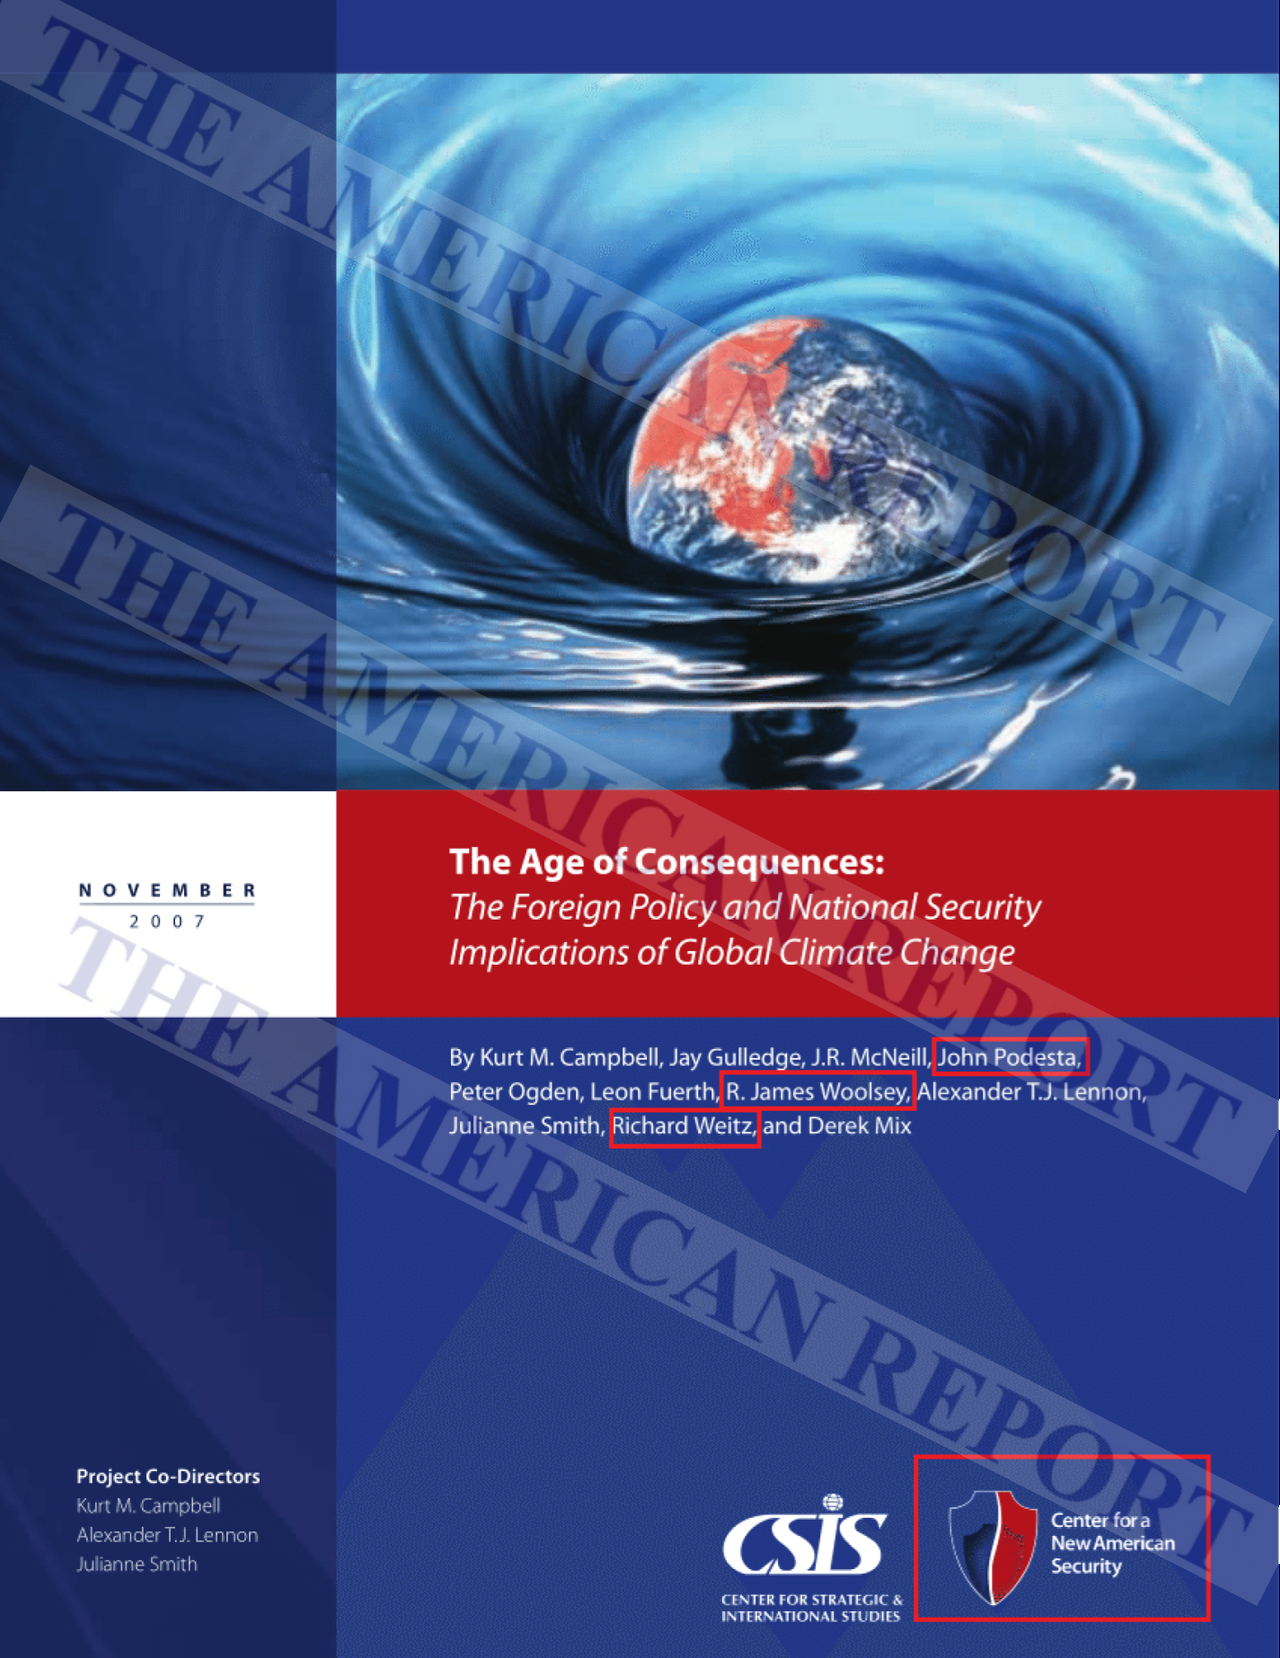 THE-AGE-OF-CONSEQUENCES-BOOK-COVER-THE-AMERICAN-REPORT-1280.jpg